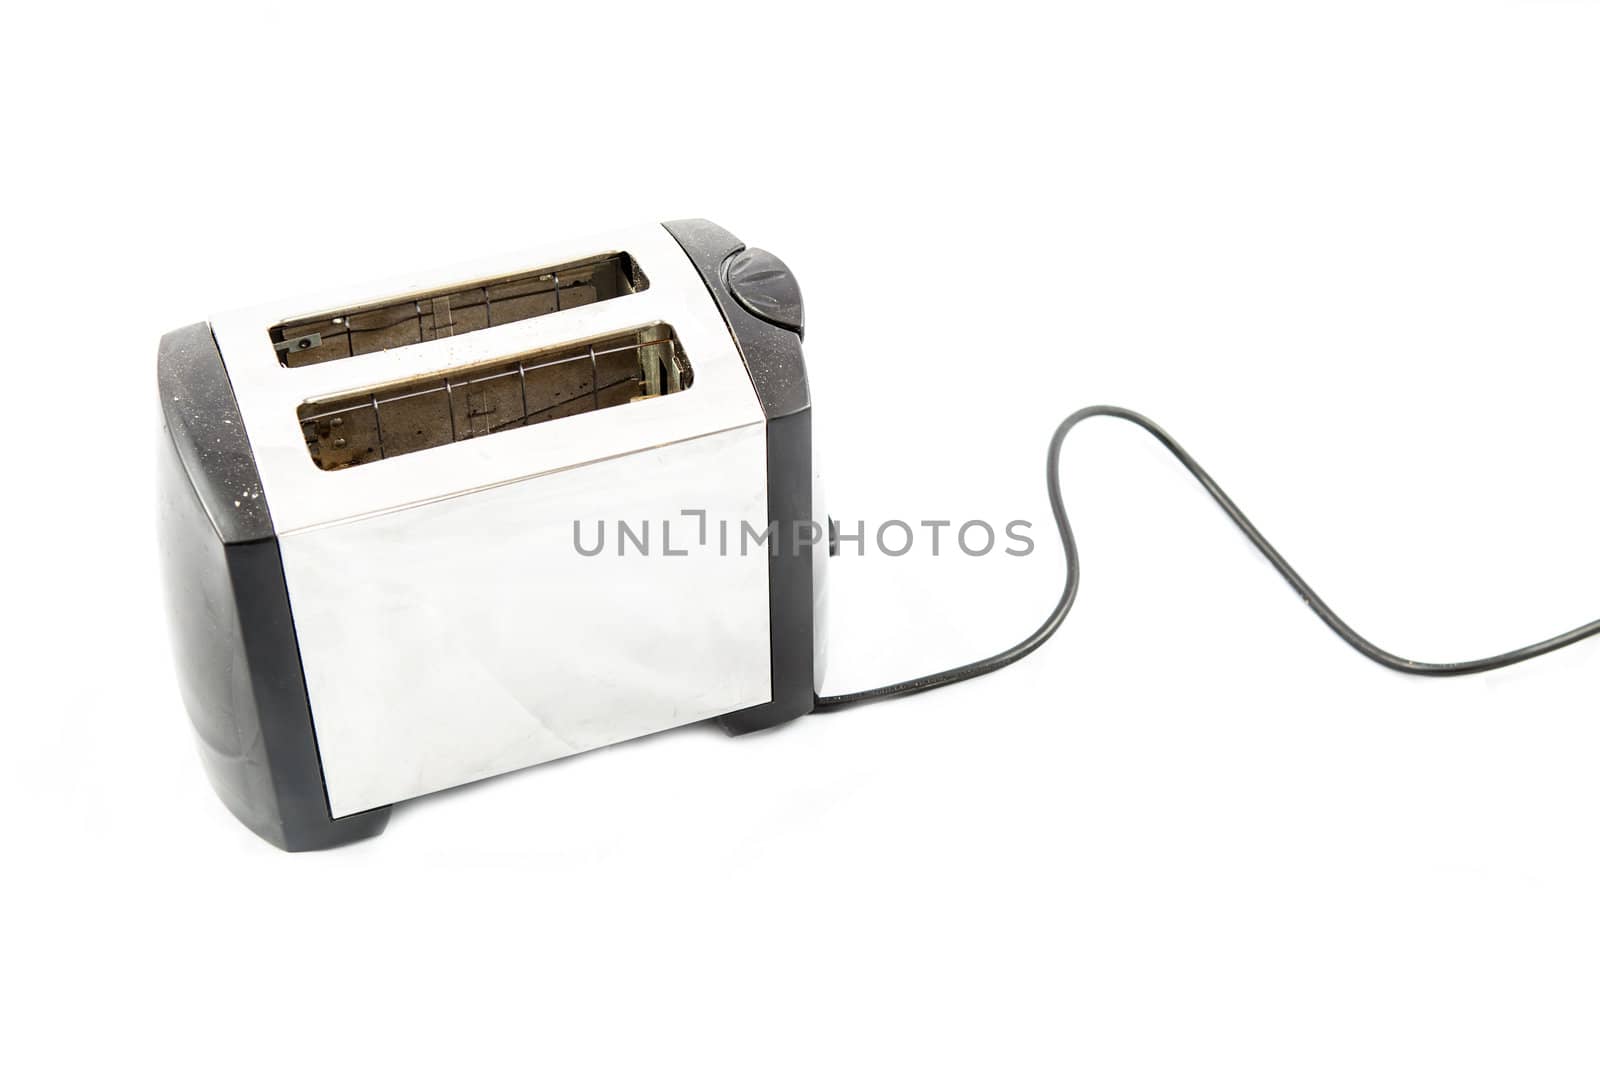 Toaster by PhotoWorks